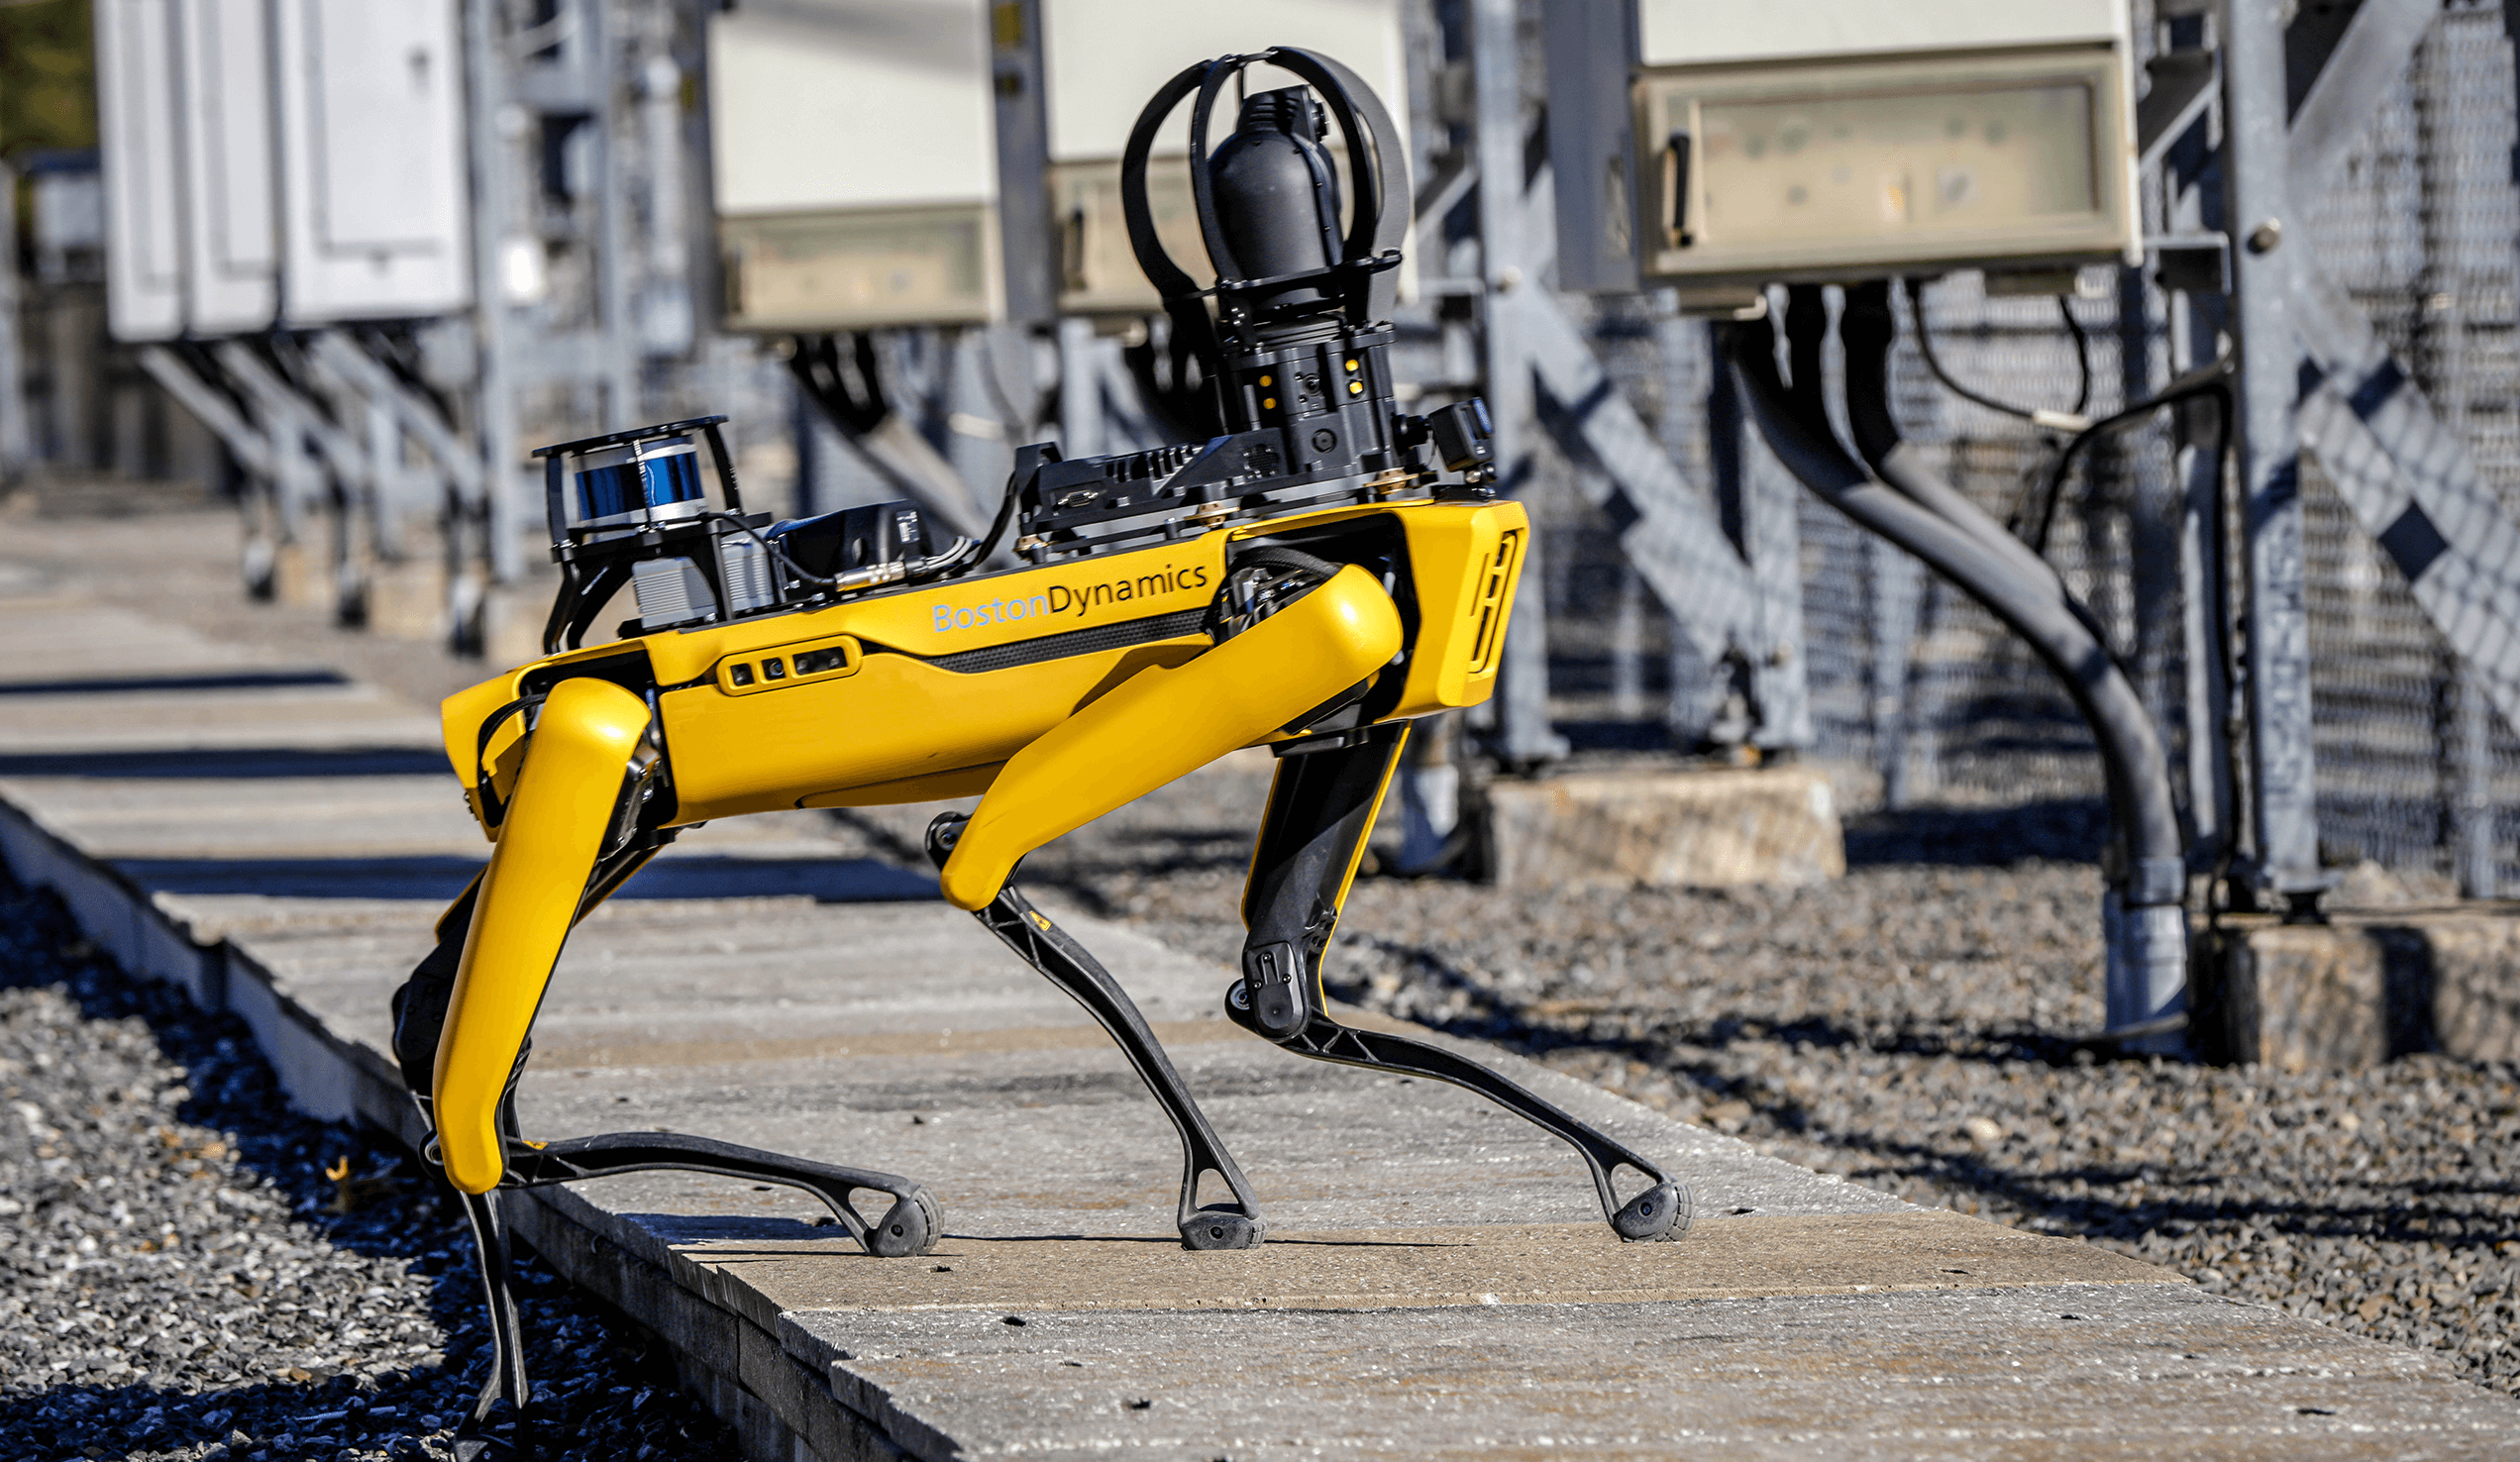 Rightpoint Helps Boston Dynamics Create Bespoke Experiences to Ready Spot for Market - Image